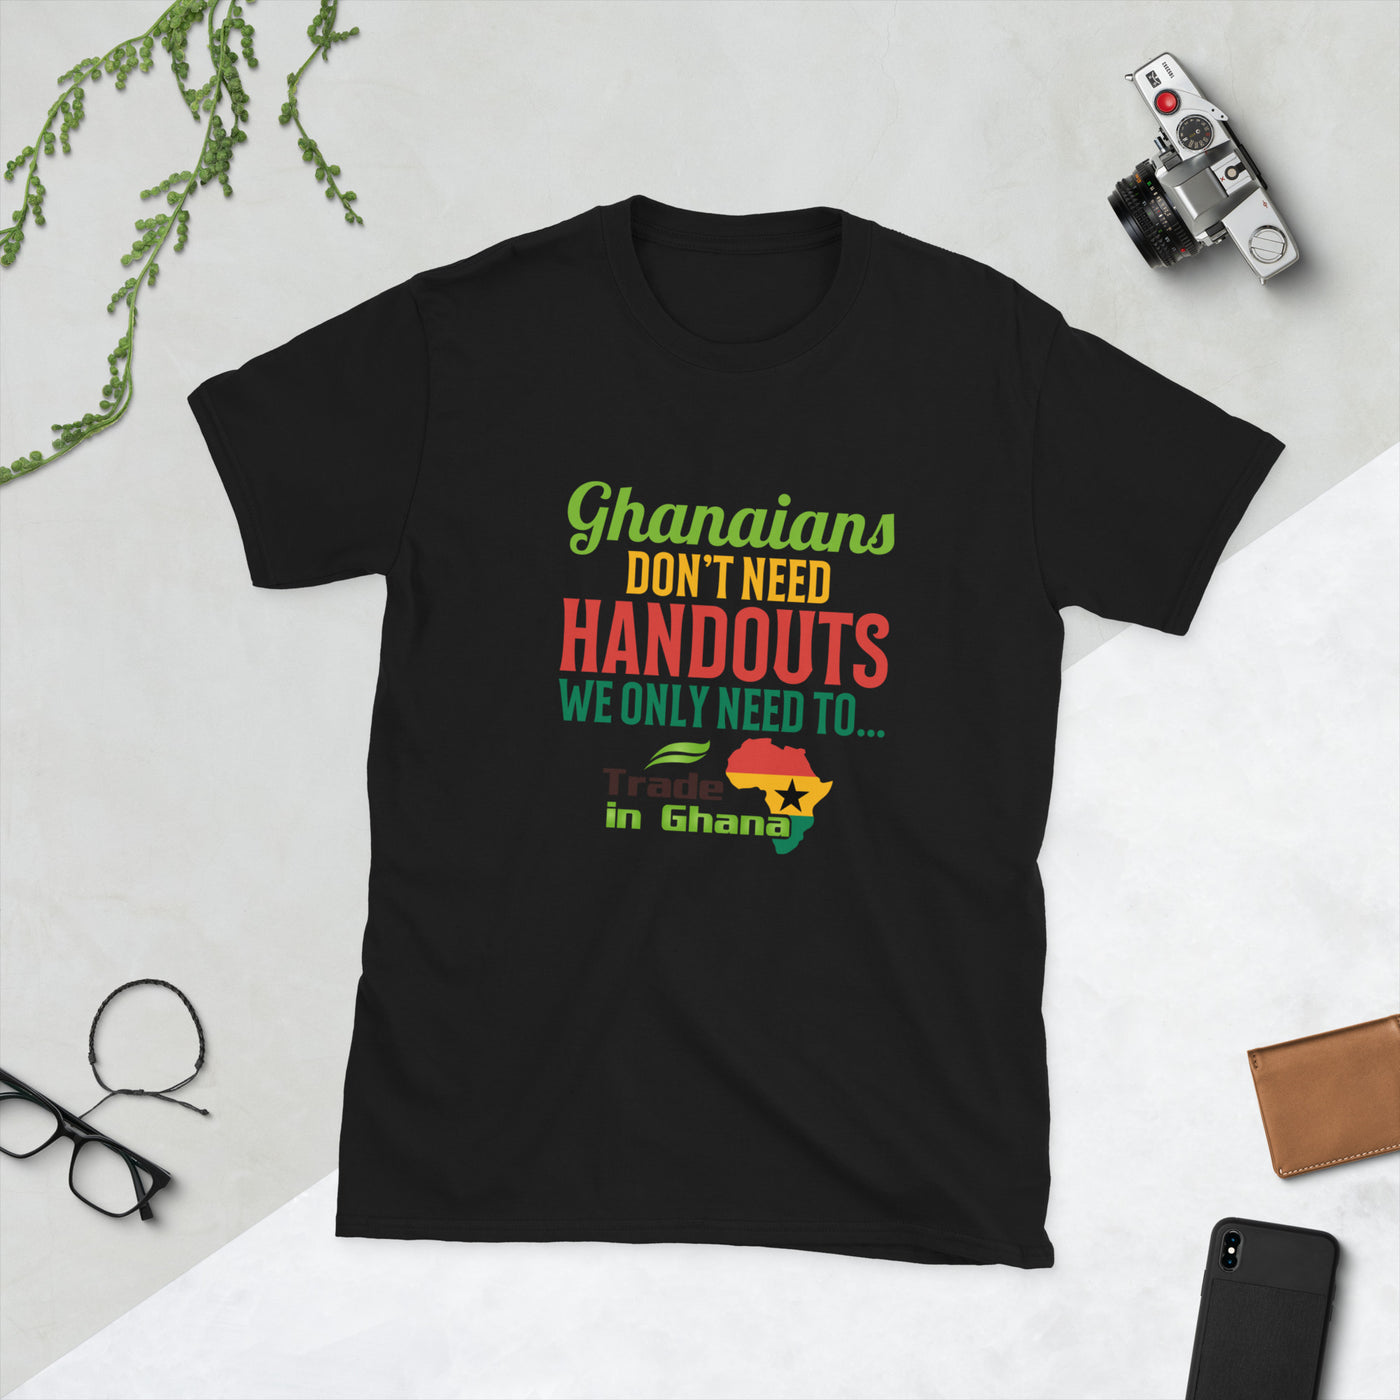 Ghanaians Don't need Handouts we only need to...Trade In Ghana